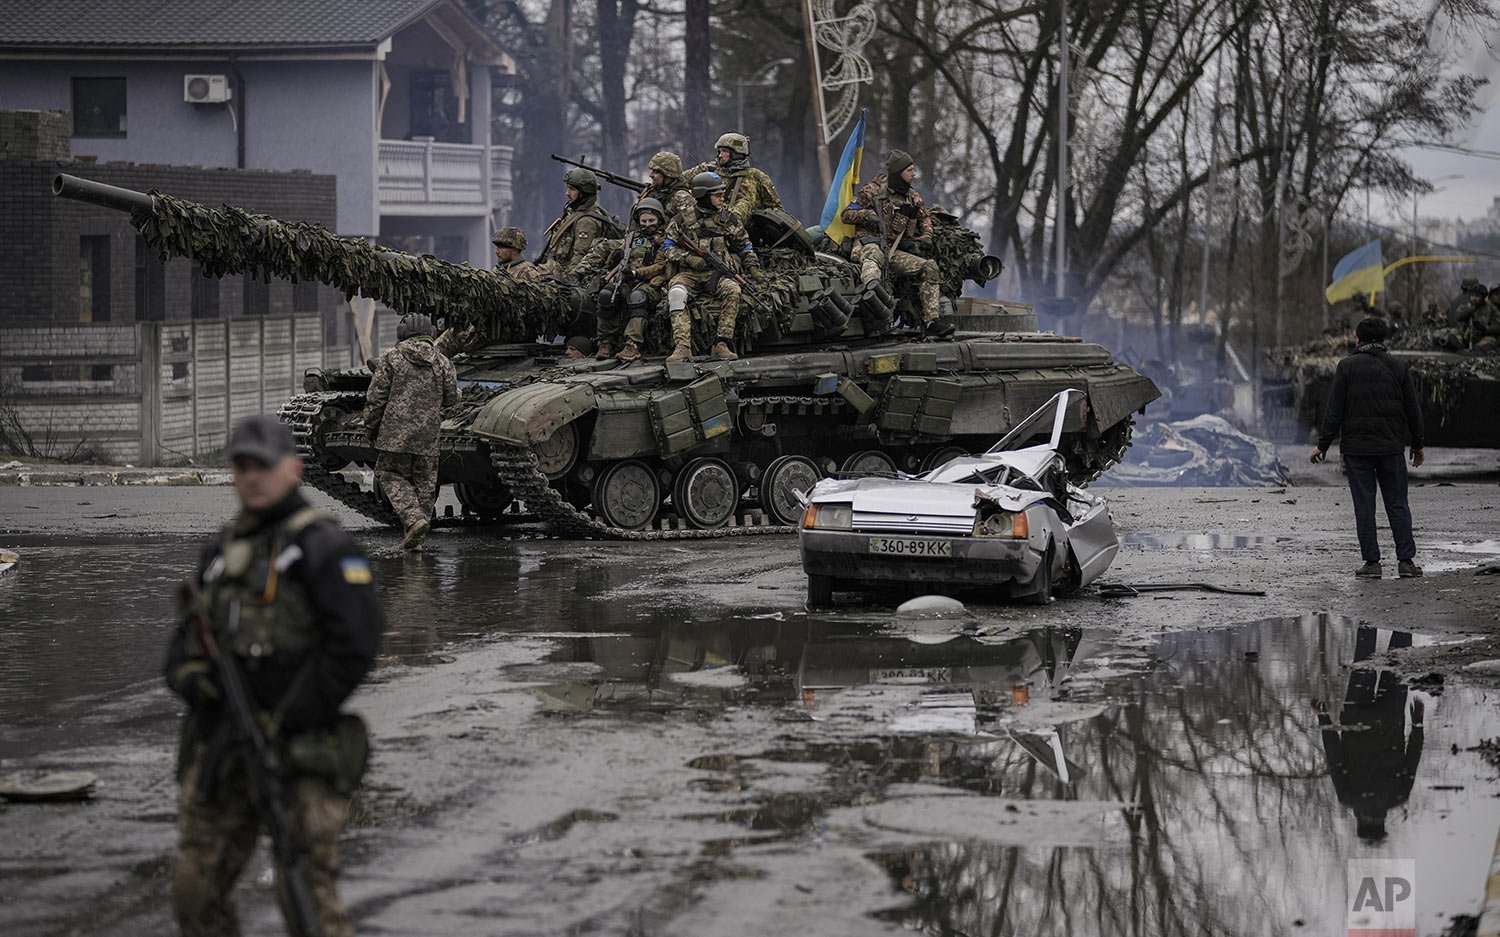  A man stands next to a civilian vehicle that was destroyed during fighting between Ukrainian and Russian forces that still contains the body of the driver as Ukrainian servicemen ride on a tank vehicle outside Kyiv, Ukraine, Saturday, April 2, 2022.